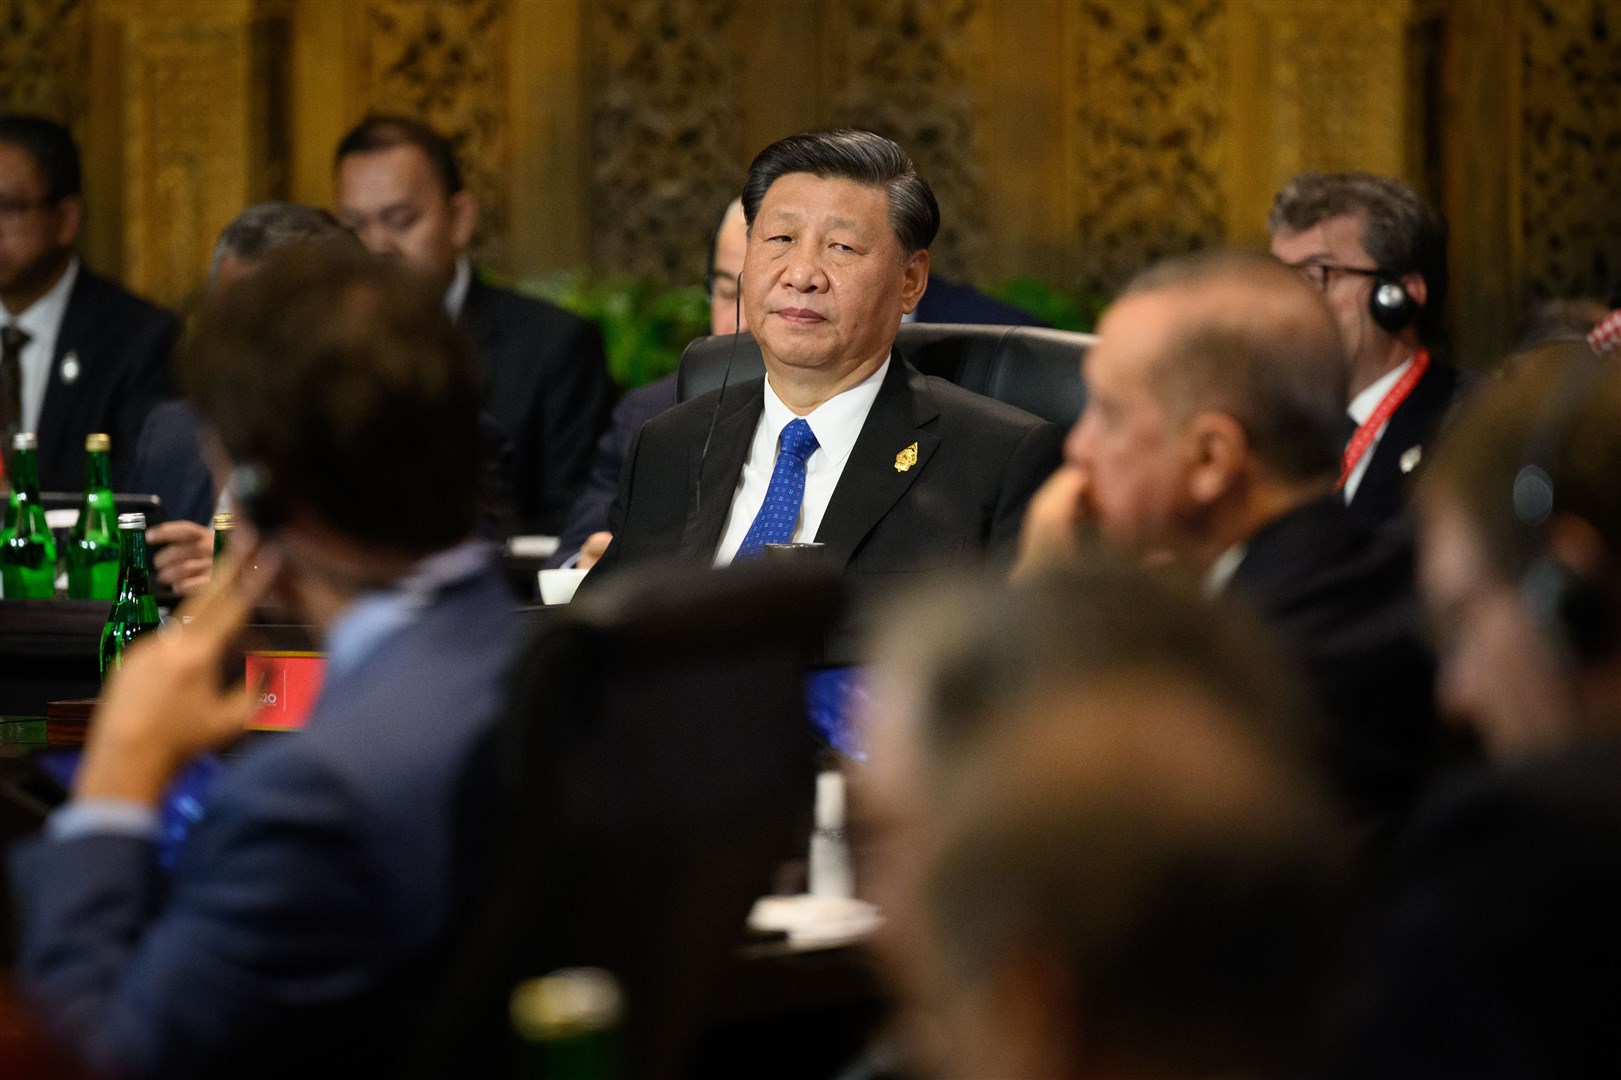 Chinese President Xi Jinping attended the 2022 G20 summit in Bali, Indonesia, but did not attend this year’s gathering in New Delhi, India (Leon Neal/PA)